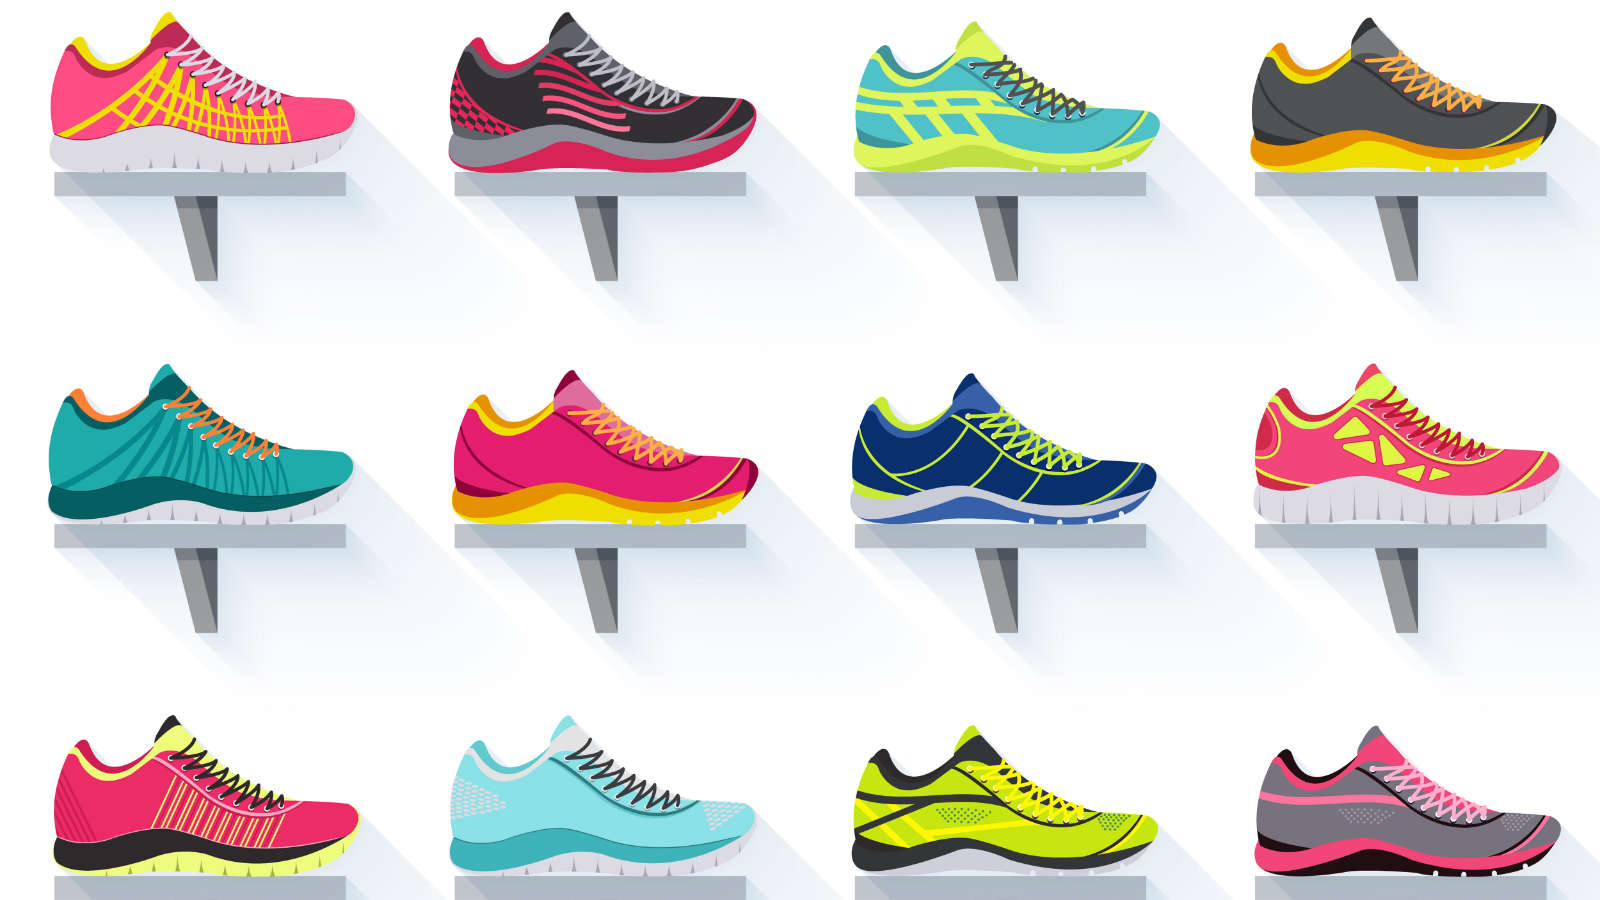 These Are The Best Marathon Running Shoes. Do You Agree?